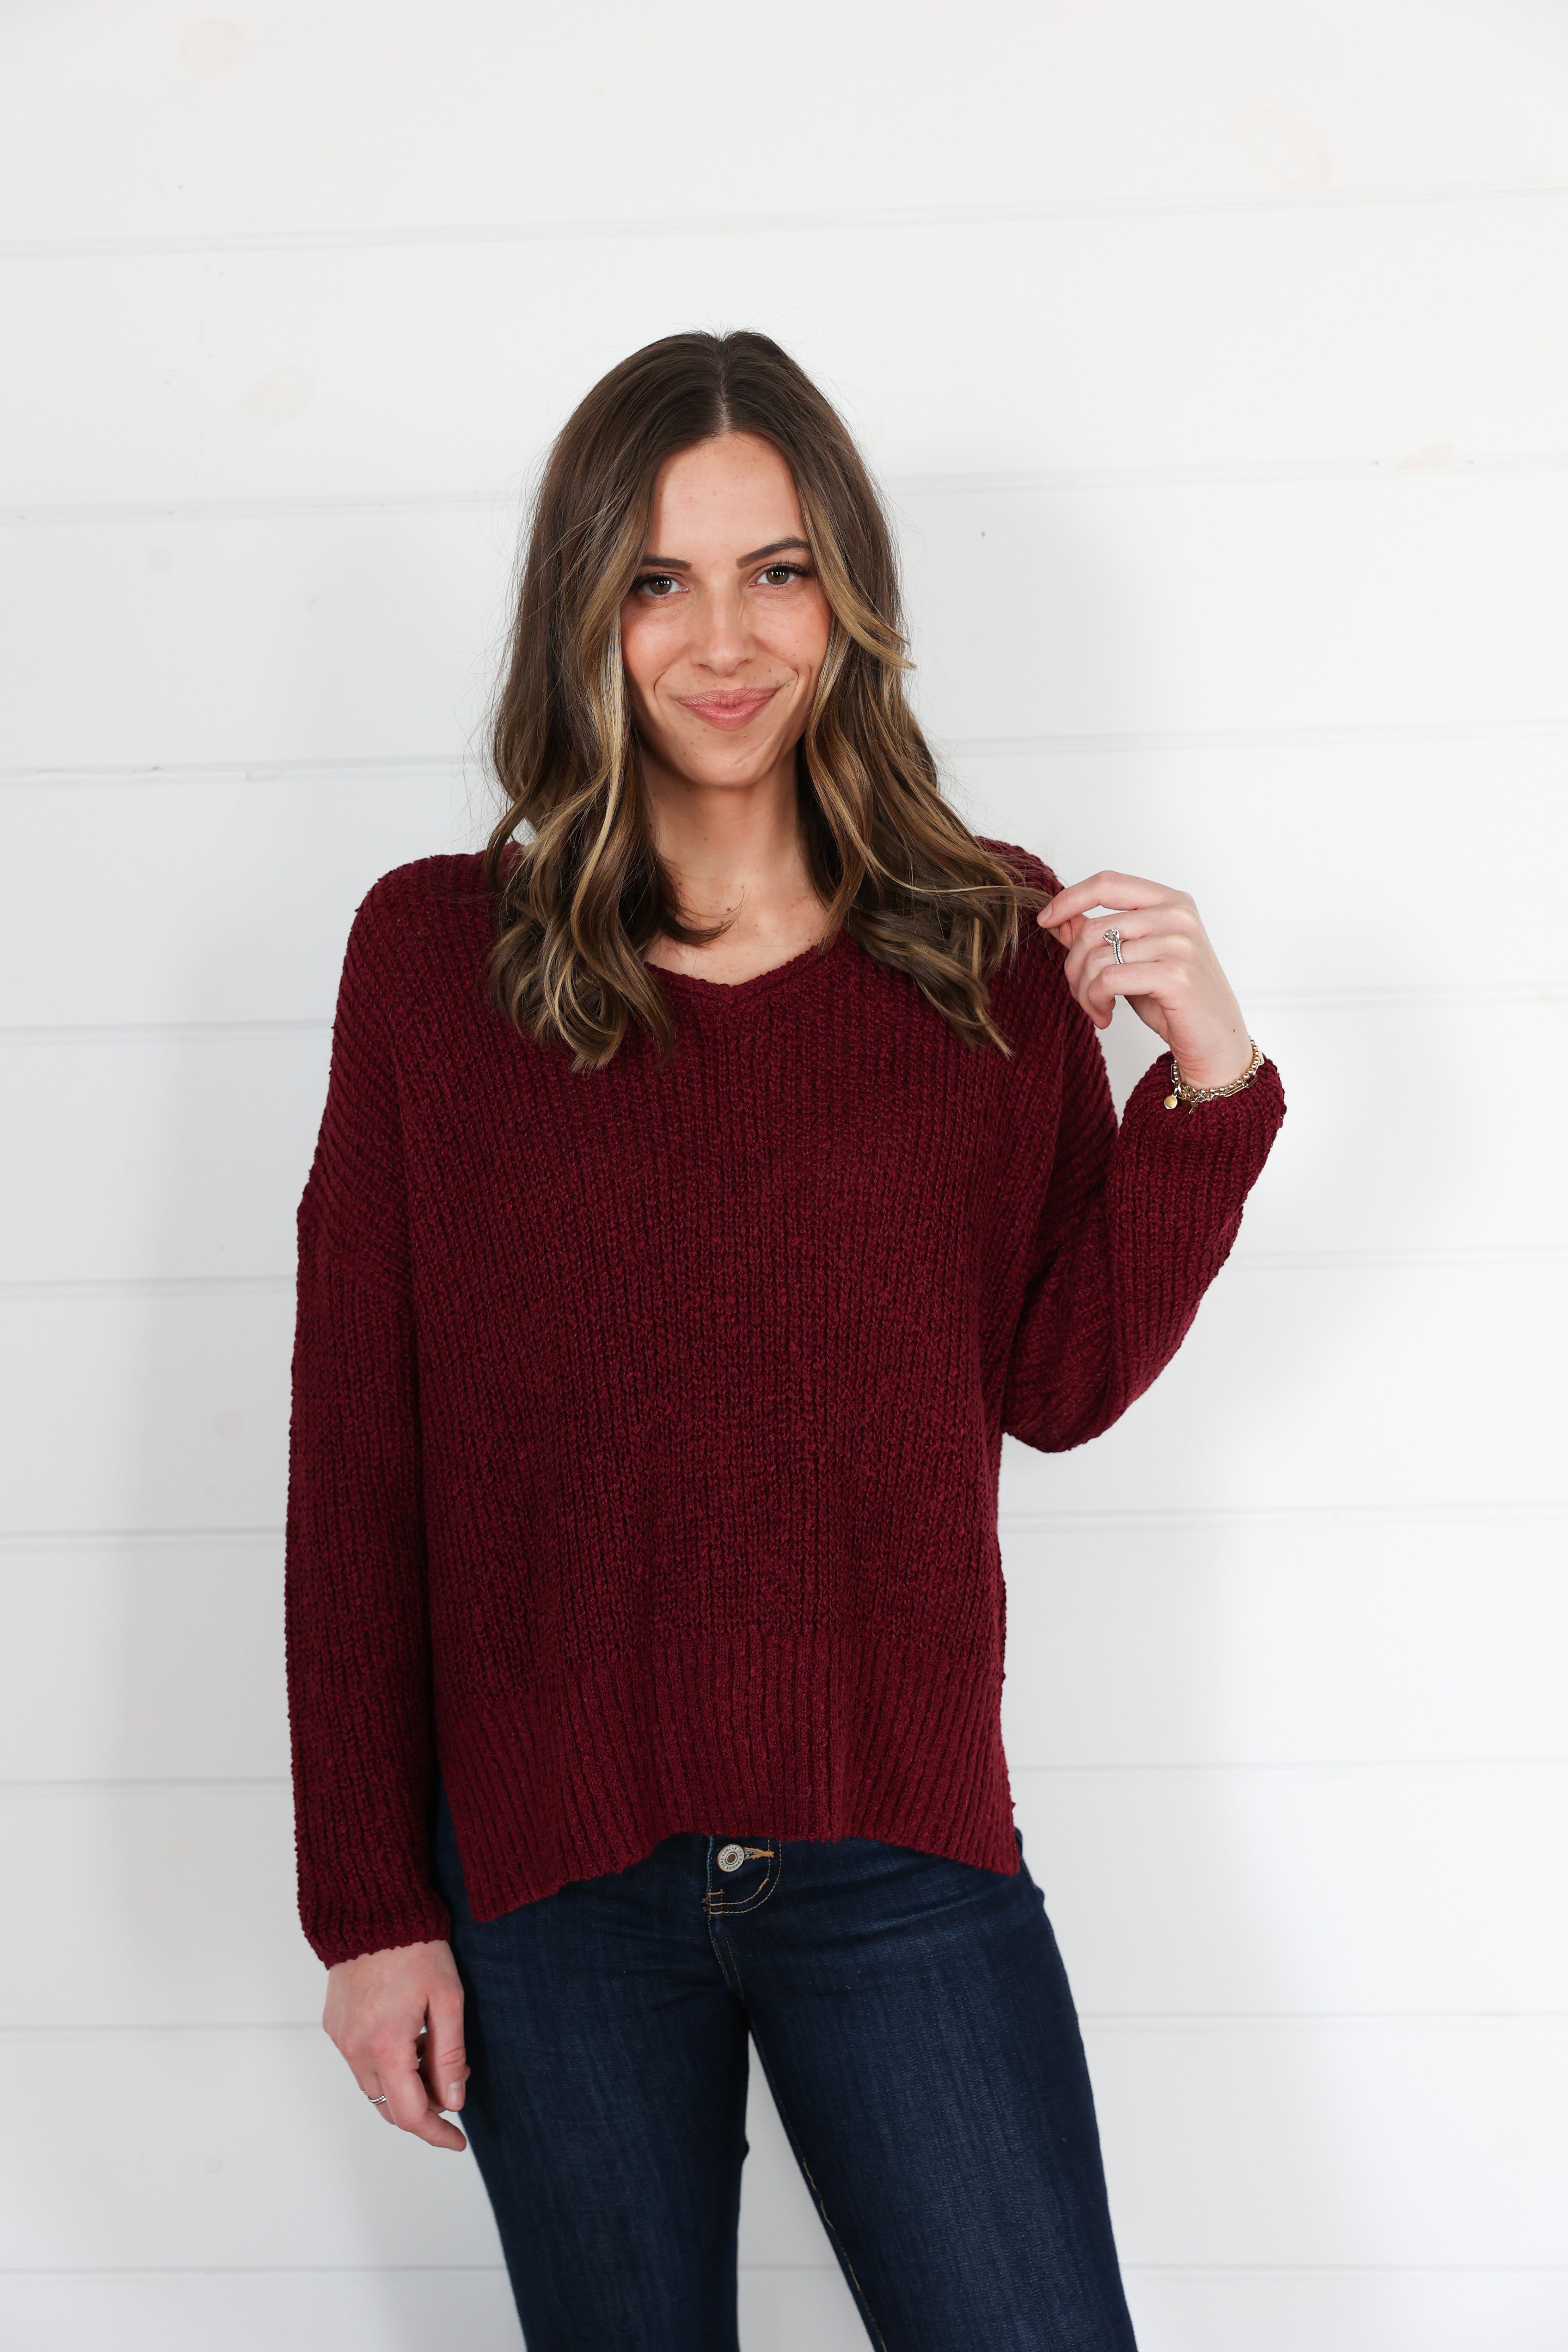 Sweet Red Wine Sweater (Two Left)